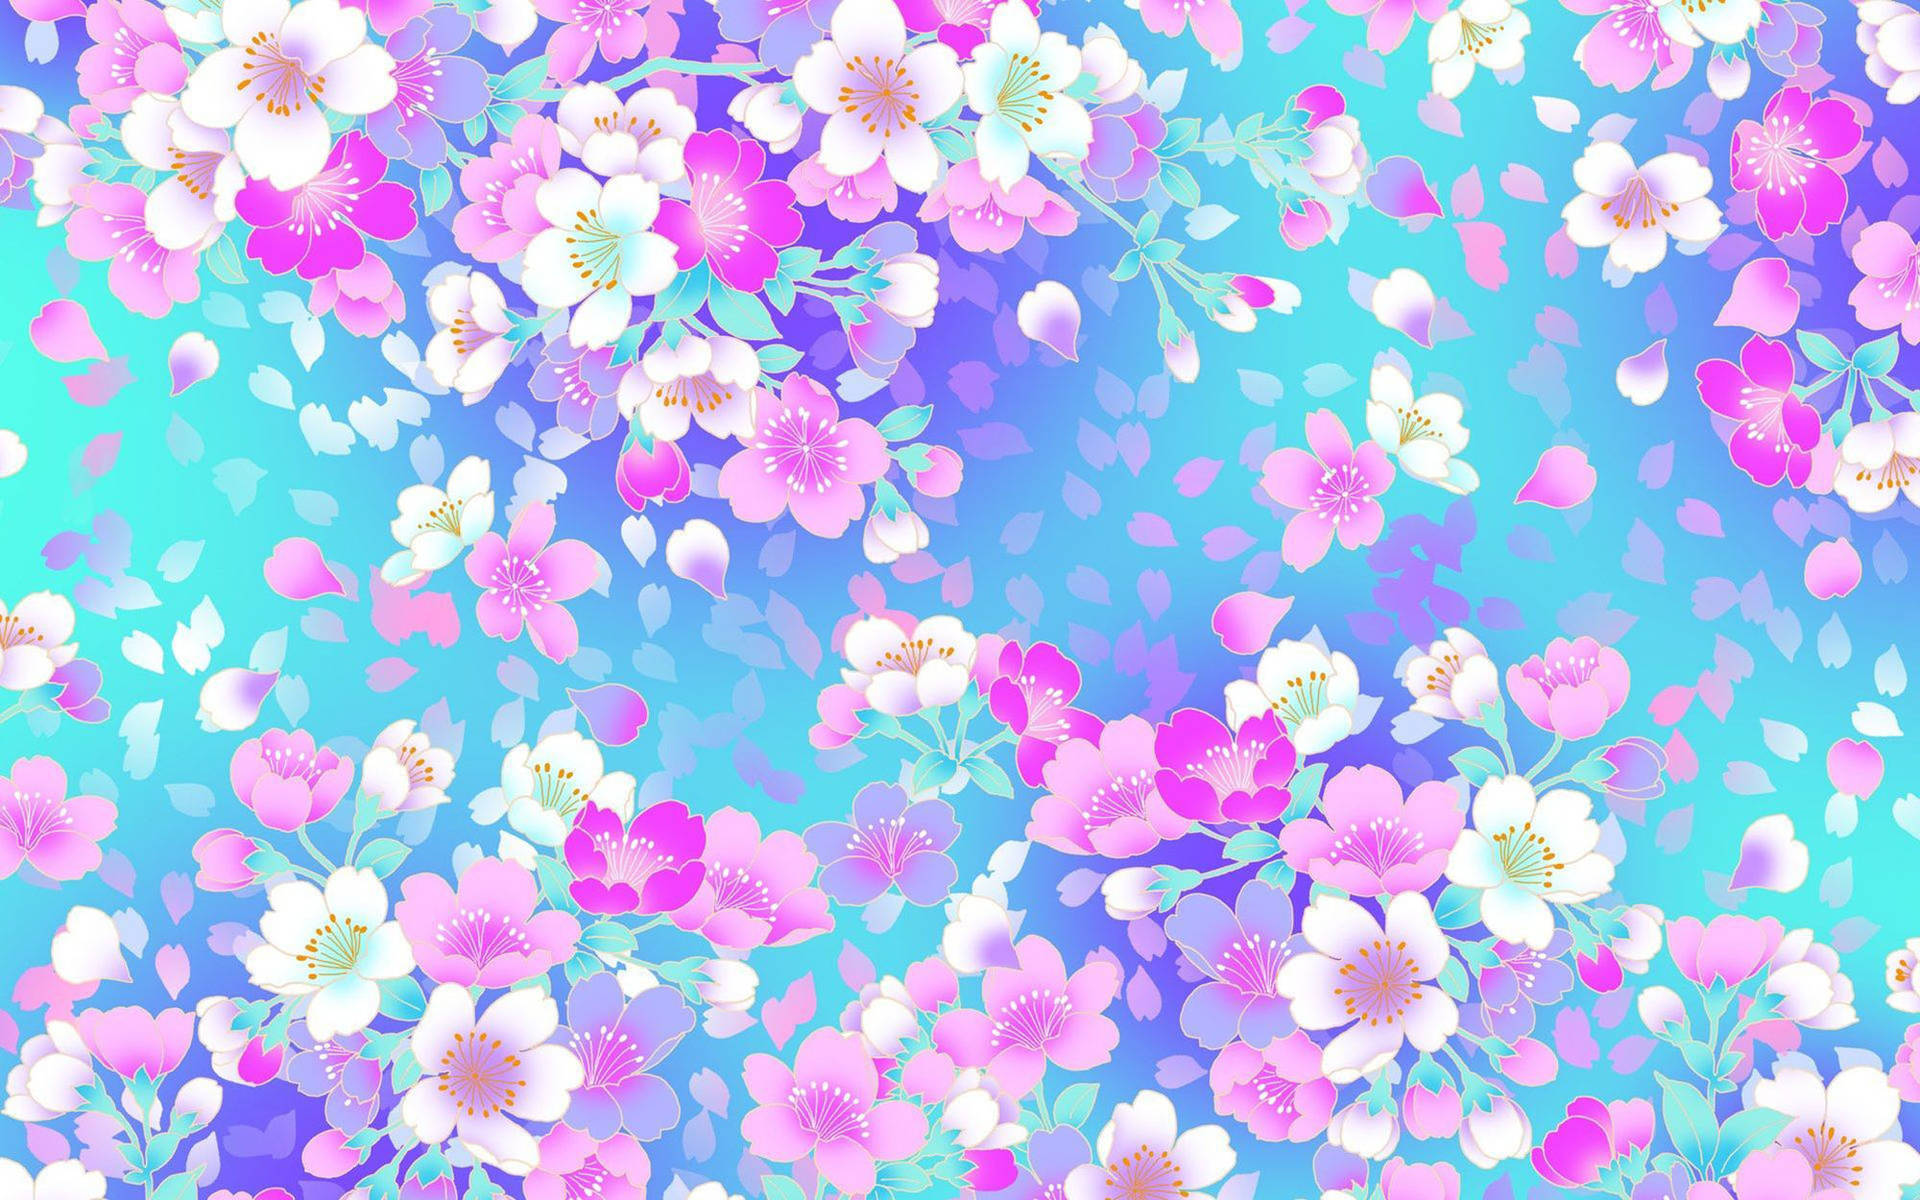 Dope Colorful Girly Floral Background